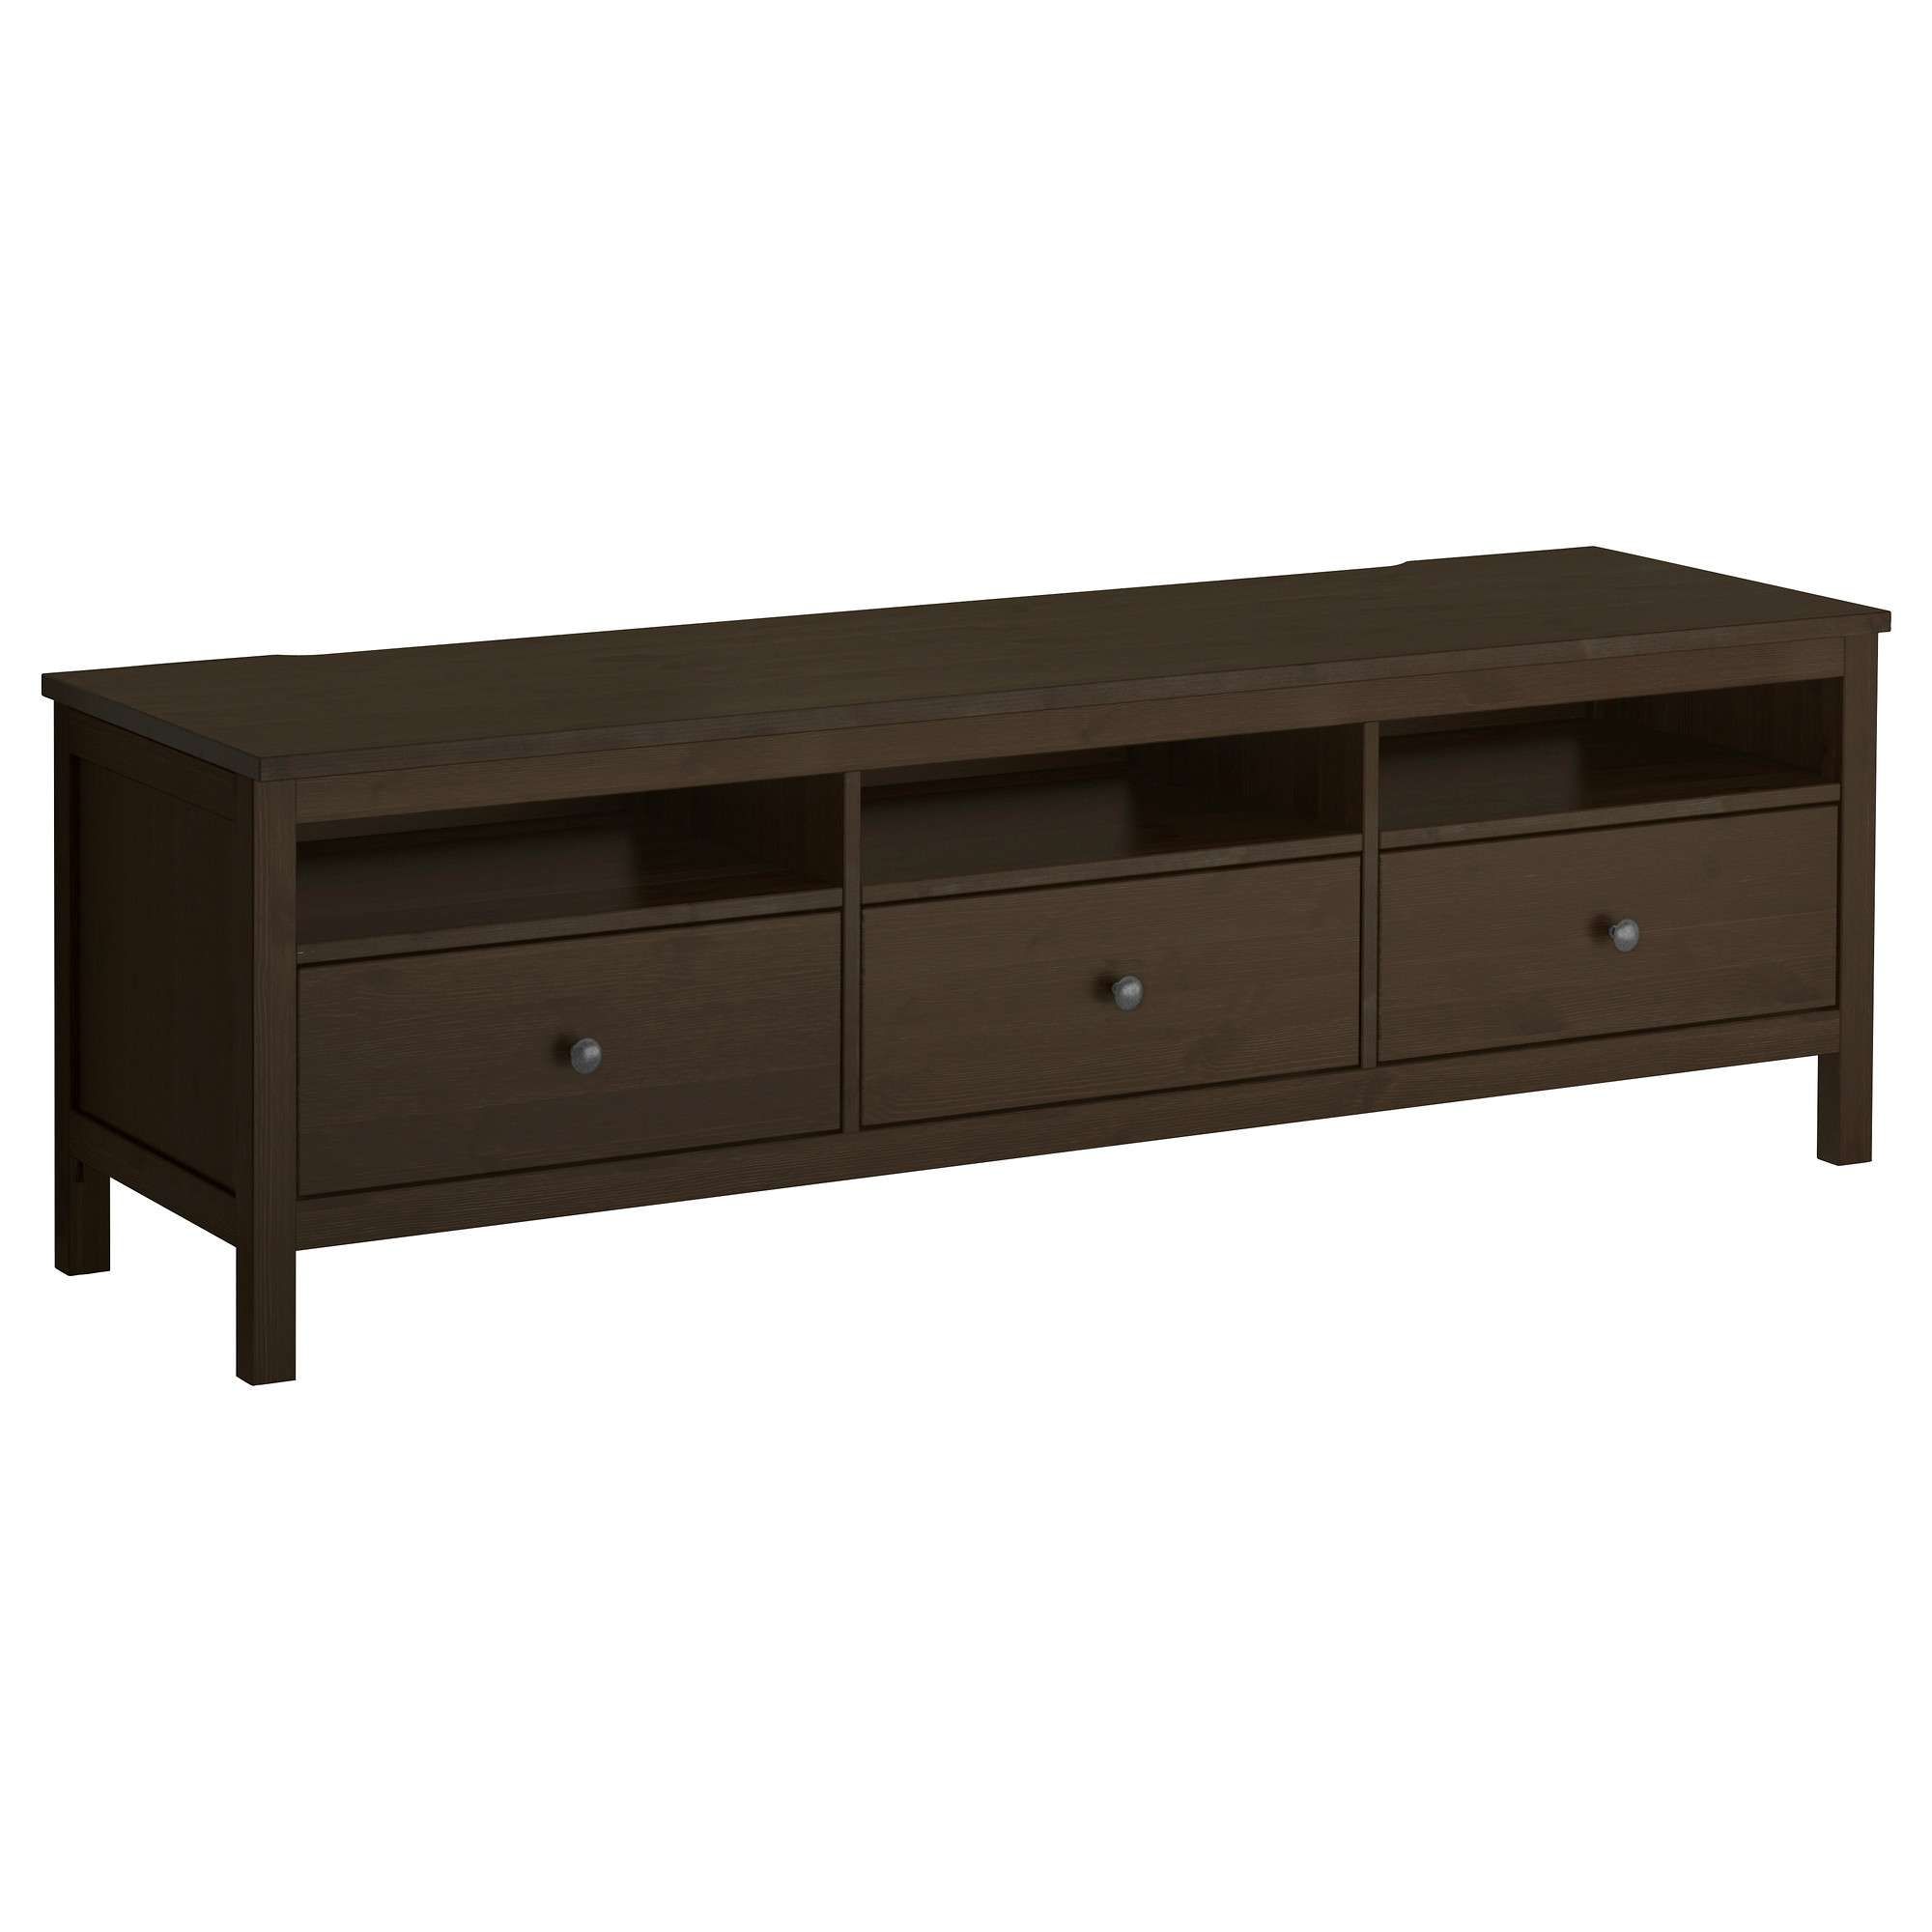 Hemnes Tv Unit – Black Brown – Ikea In Tv Cabinets With Drawers (View 6 of 20)